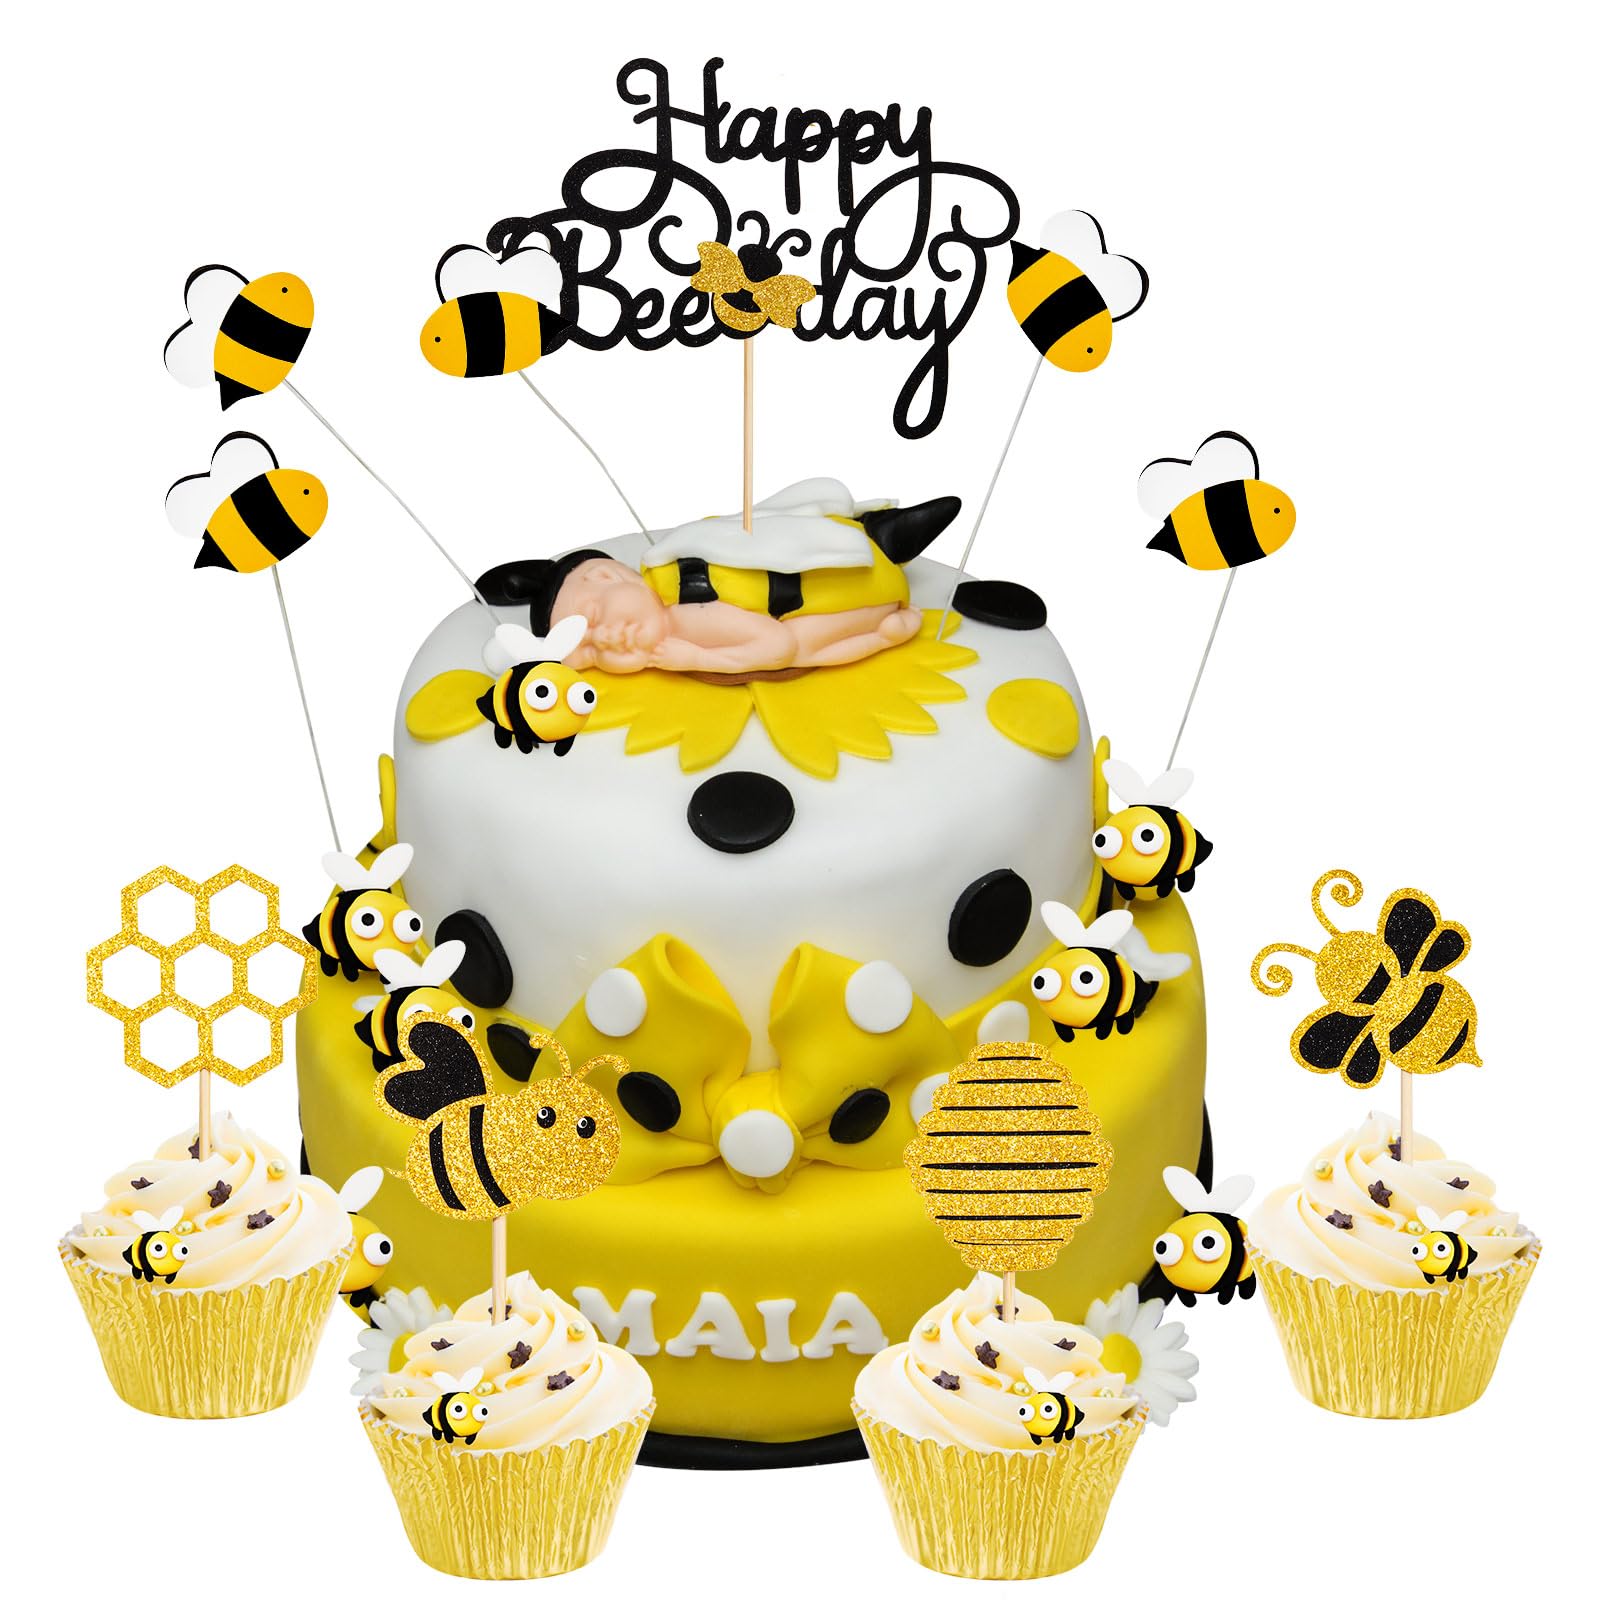 Cakes by Lisa - Happy Bee-day! A Bee themed cake... | Facebook